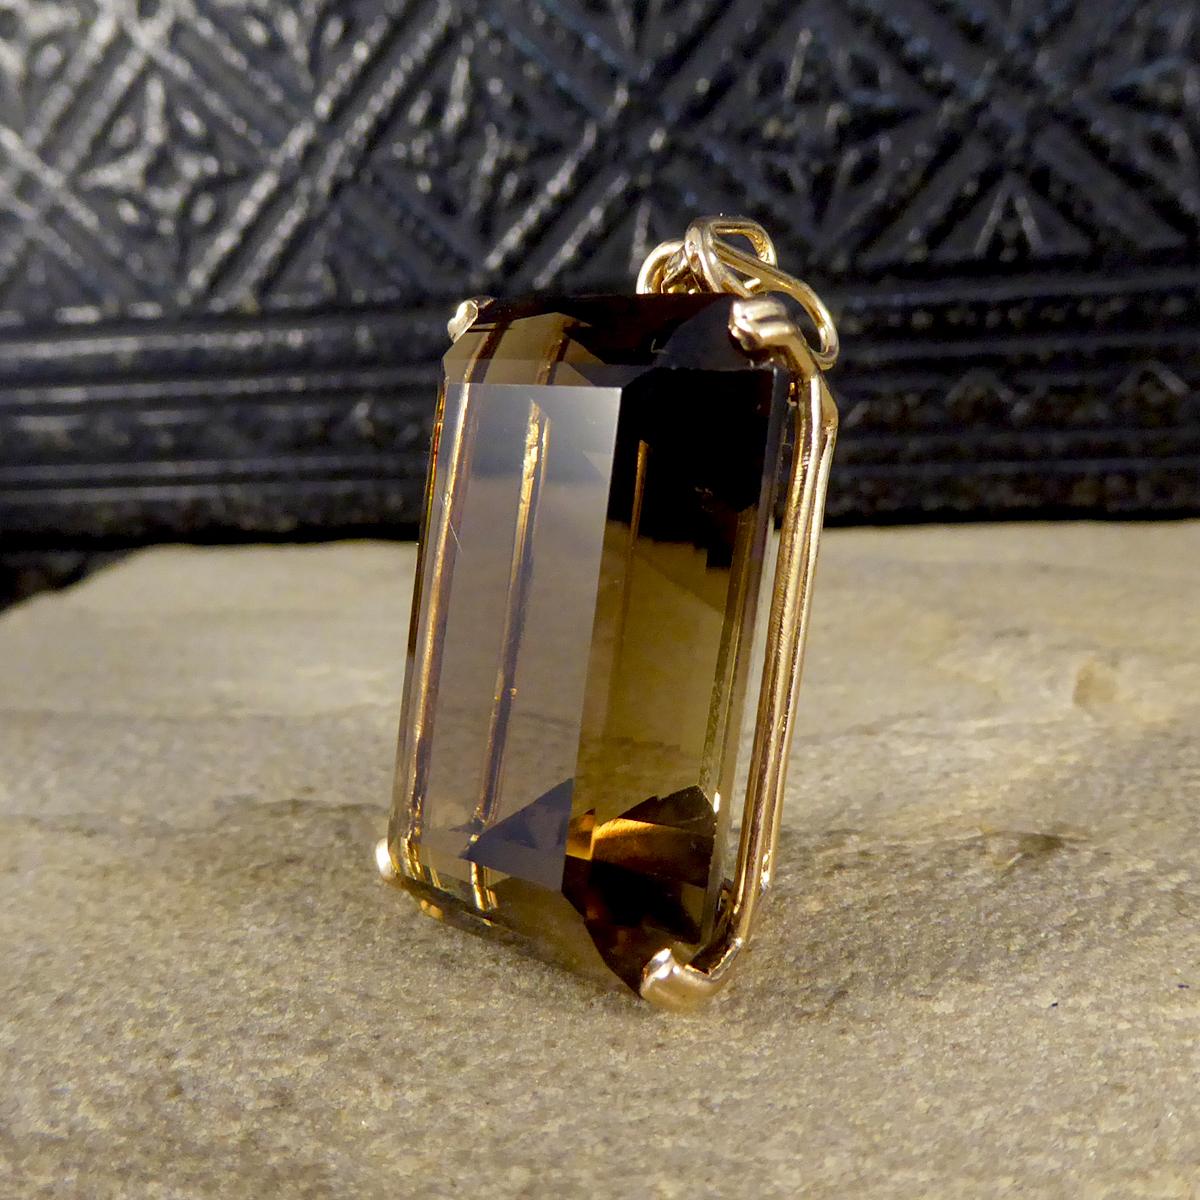 This lovely vintage pendant has been crafted from 14ct Yellow Gold with clear stamps on the settings. The pendant features a single Smokey Quartz stone in a four double claw setting and have lovely deco style bail so a chain can be attached to wear